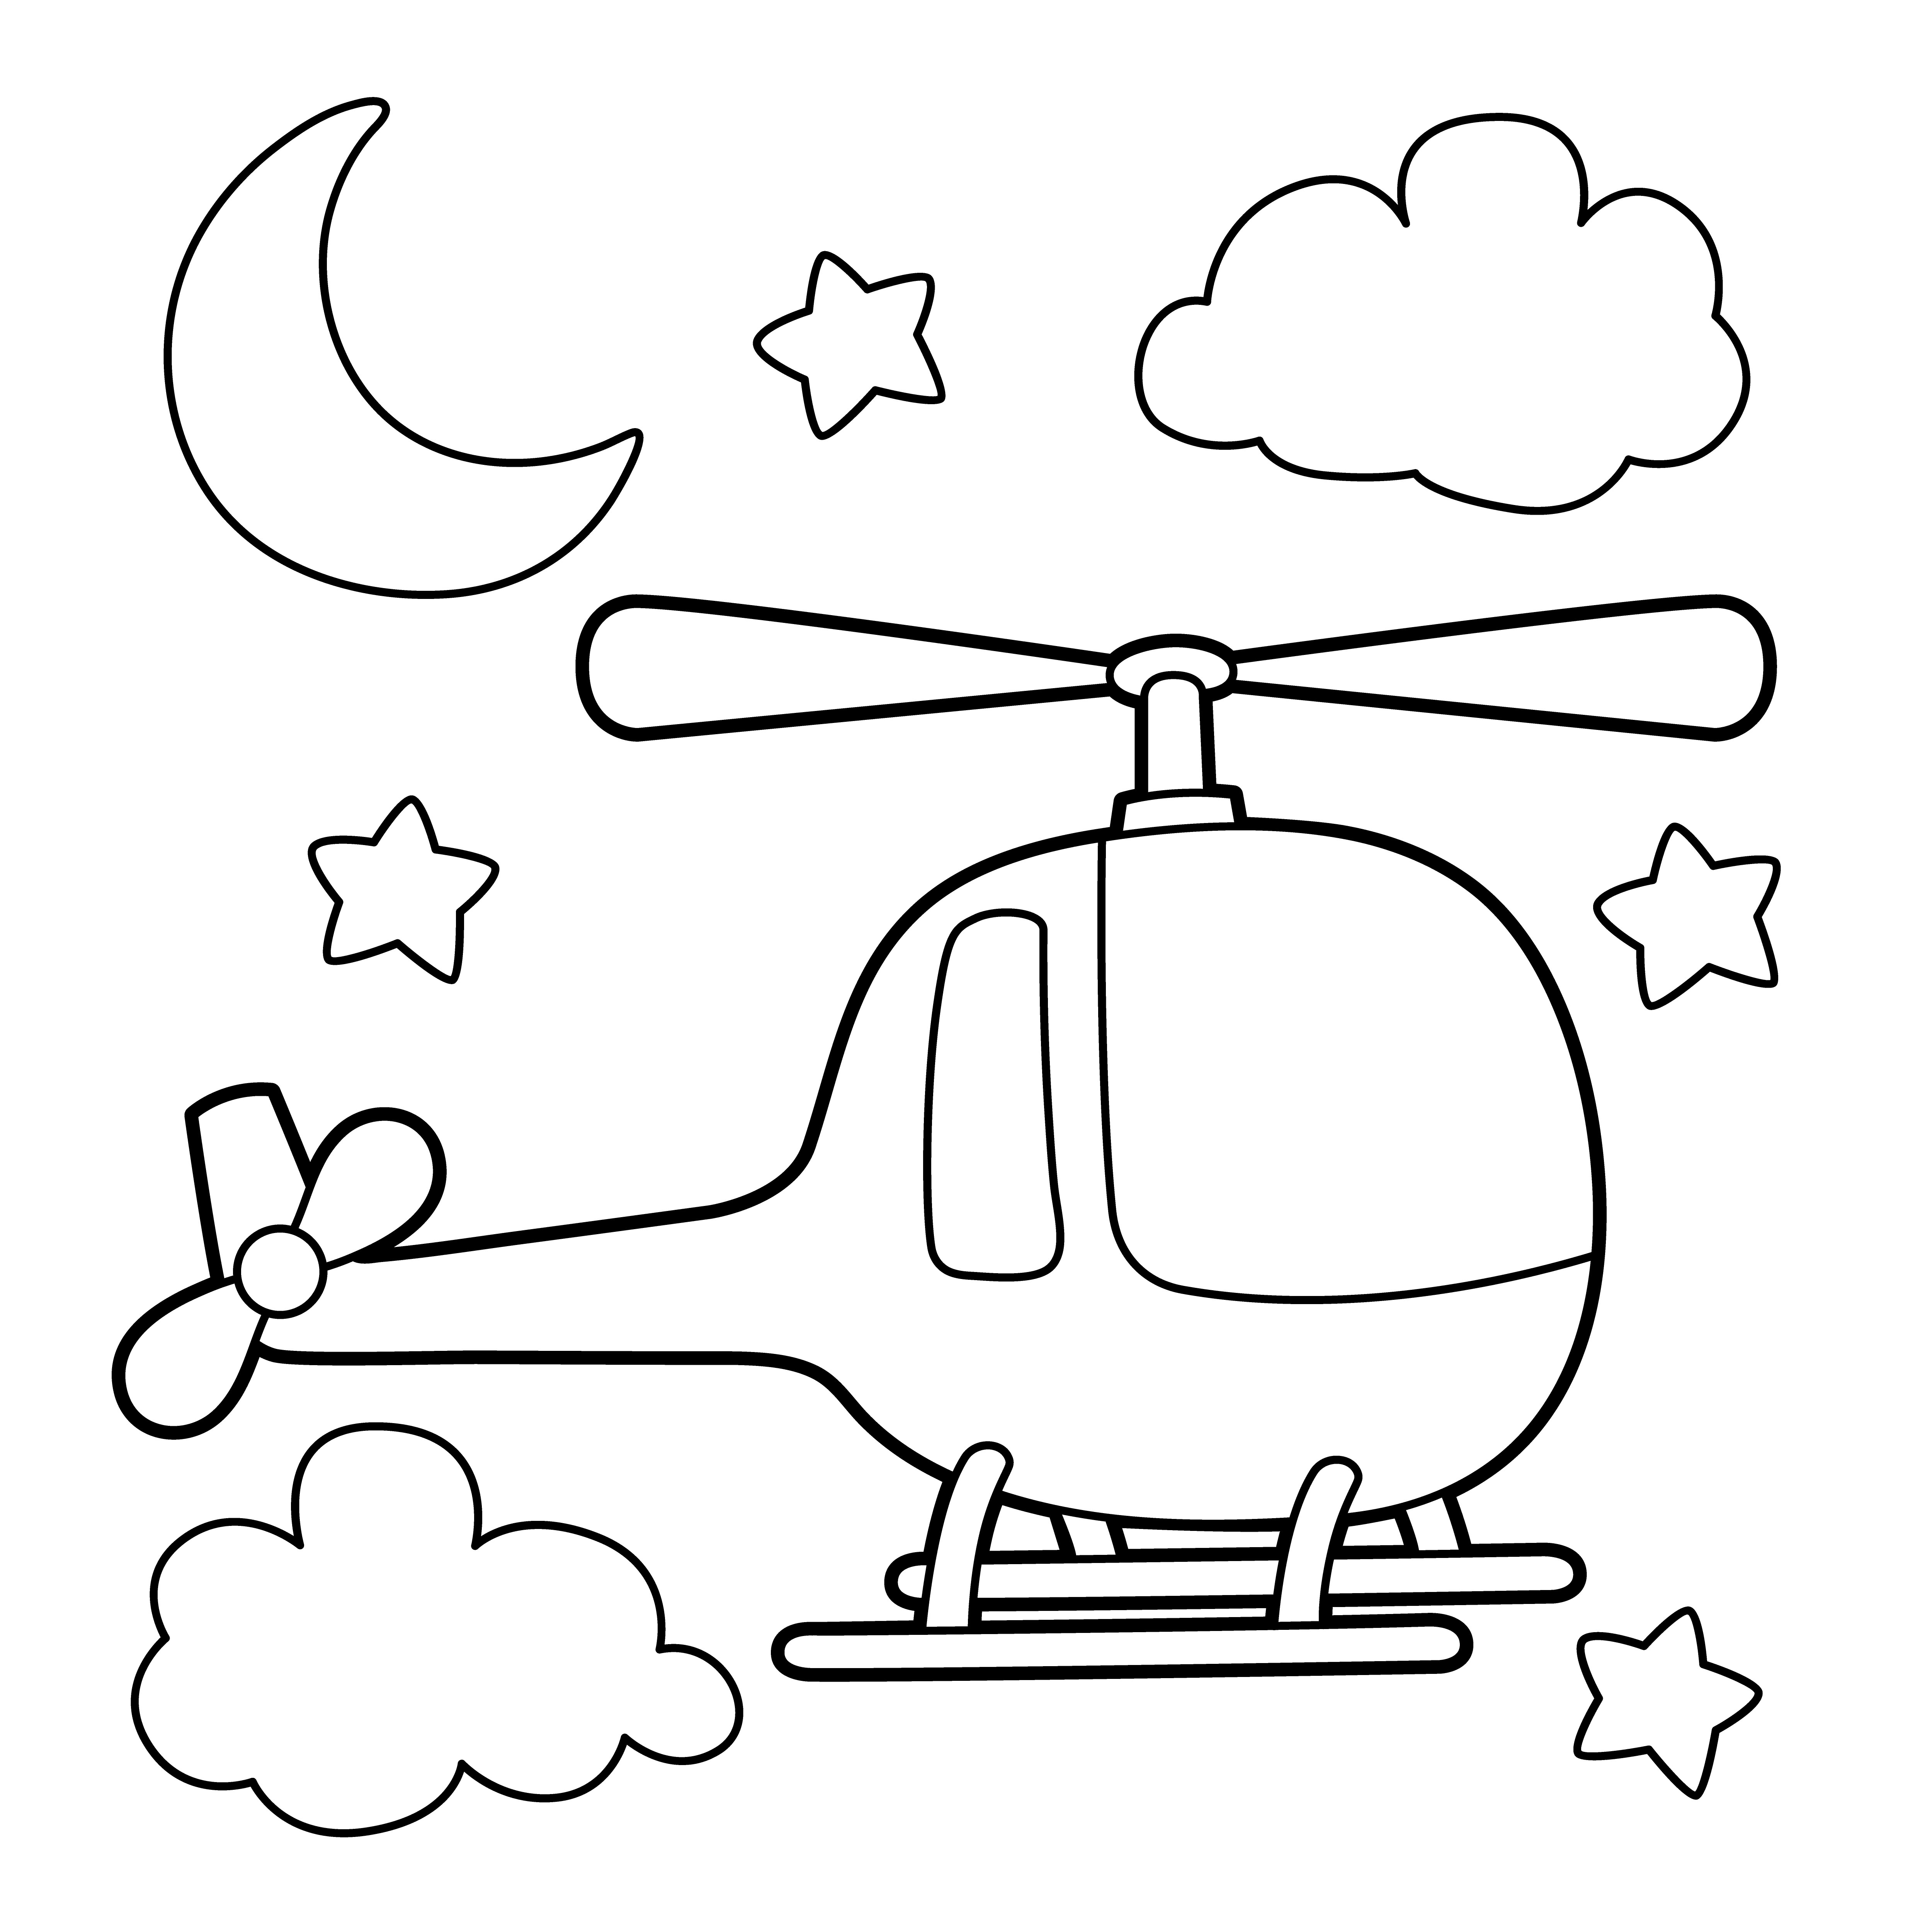 Helicopter Coloring Page 20 Vector Art at Vecteezy